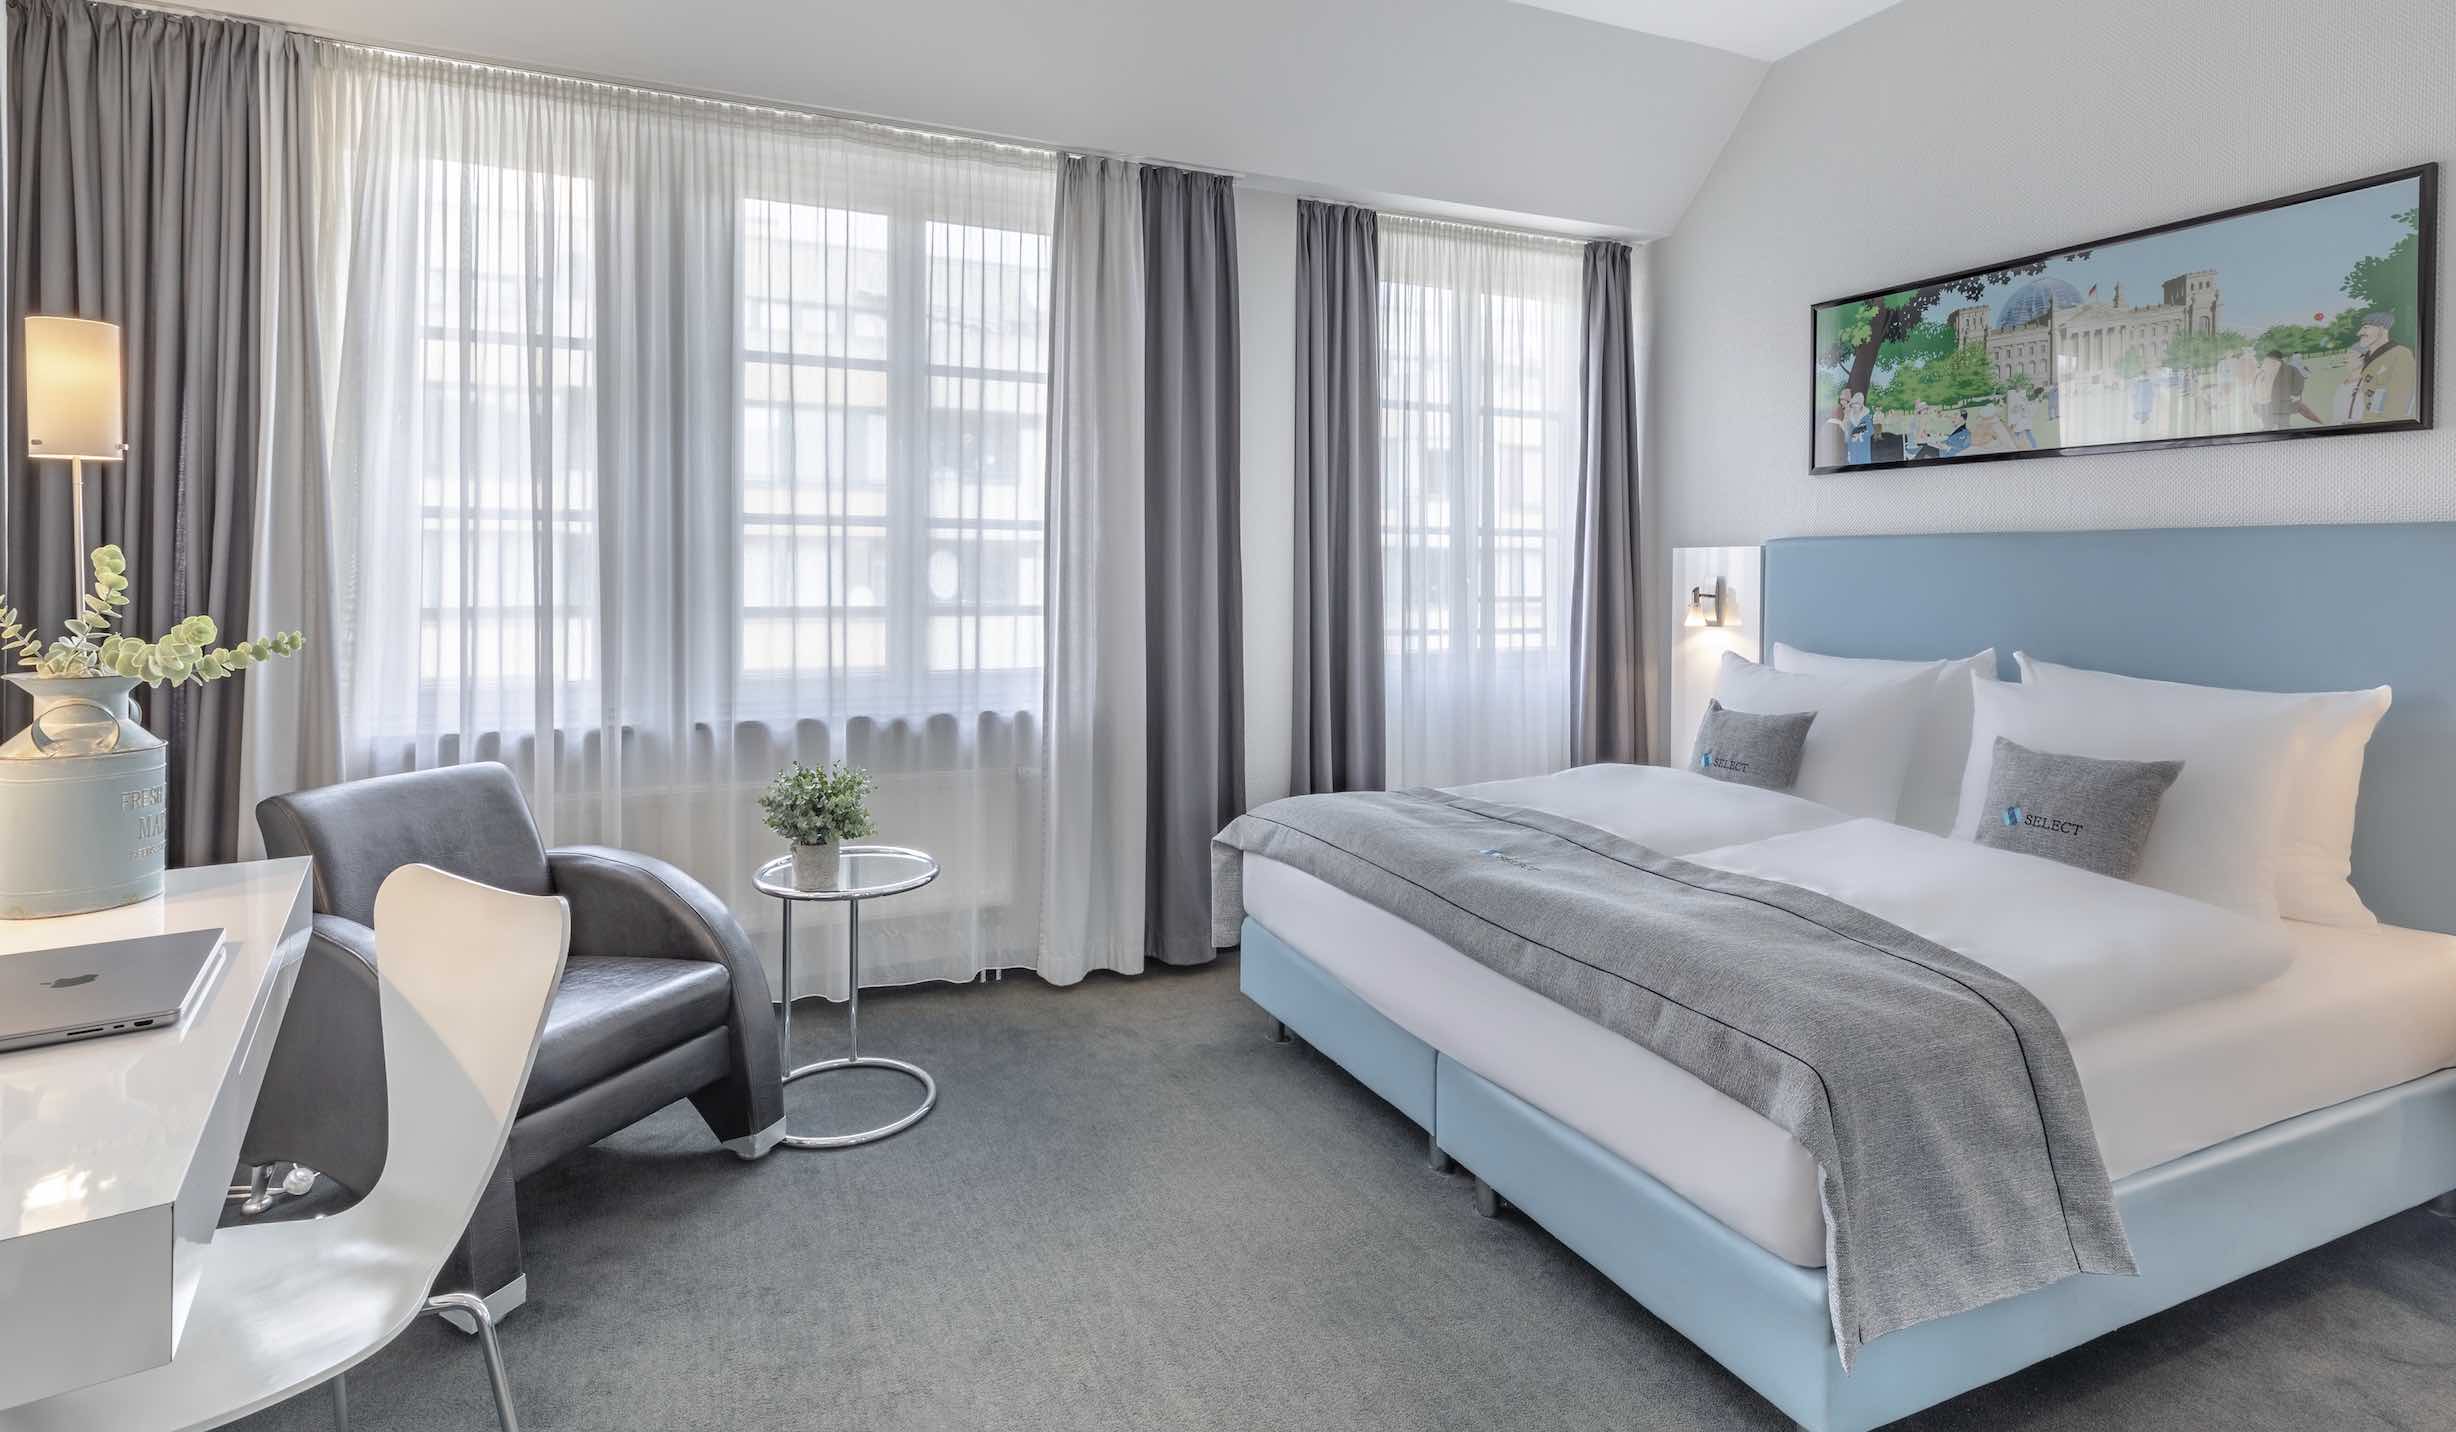 Superior Double Room at Select Hotel Checkpoint_Charlie one of the best luxury design hotels in Berlin